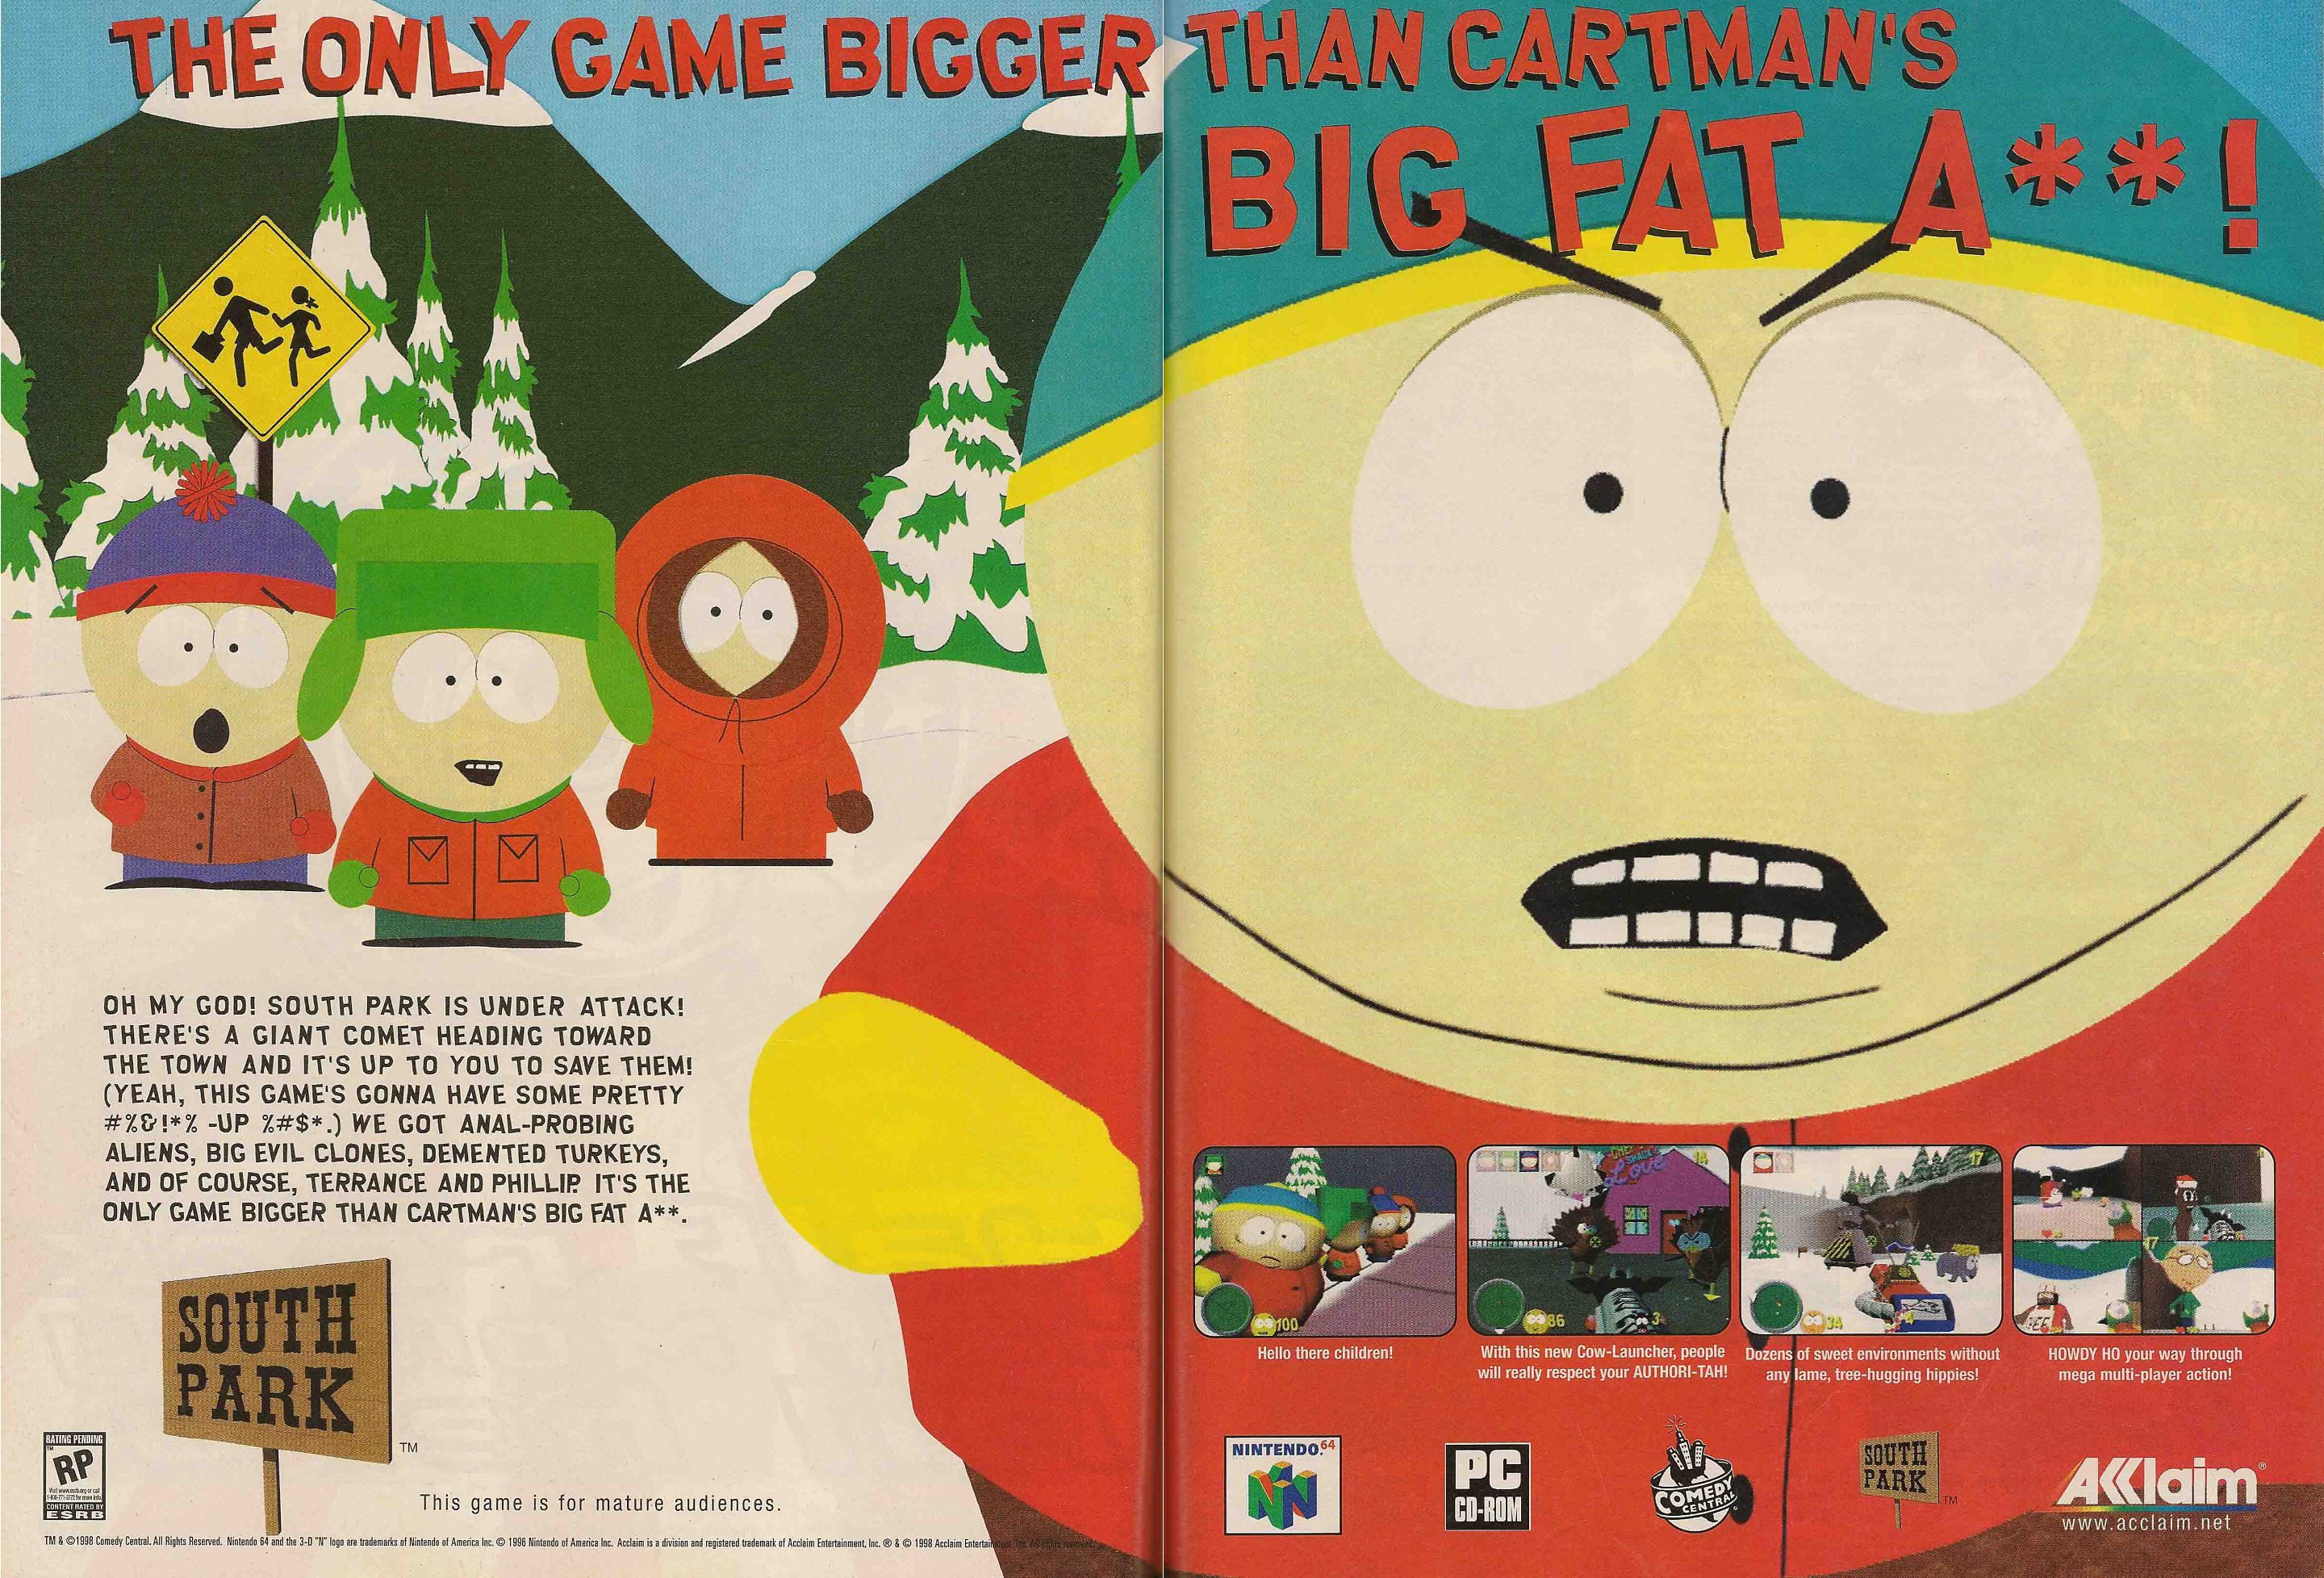 90s video game ads -  south park 1998 - Rp Bers The Only Game Bigger Than Cartman'S Oh My God! South Park Is Under Attack! There'S A Giant Comet Heading Toward The Town And It'S Up To You To Save Them! Yeah, This Game'S Gonna Have Some Pretty XUp Zs We Go